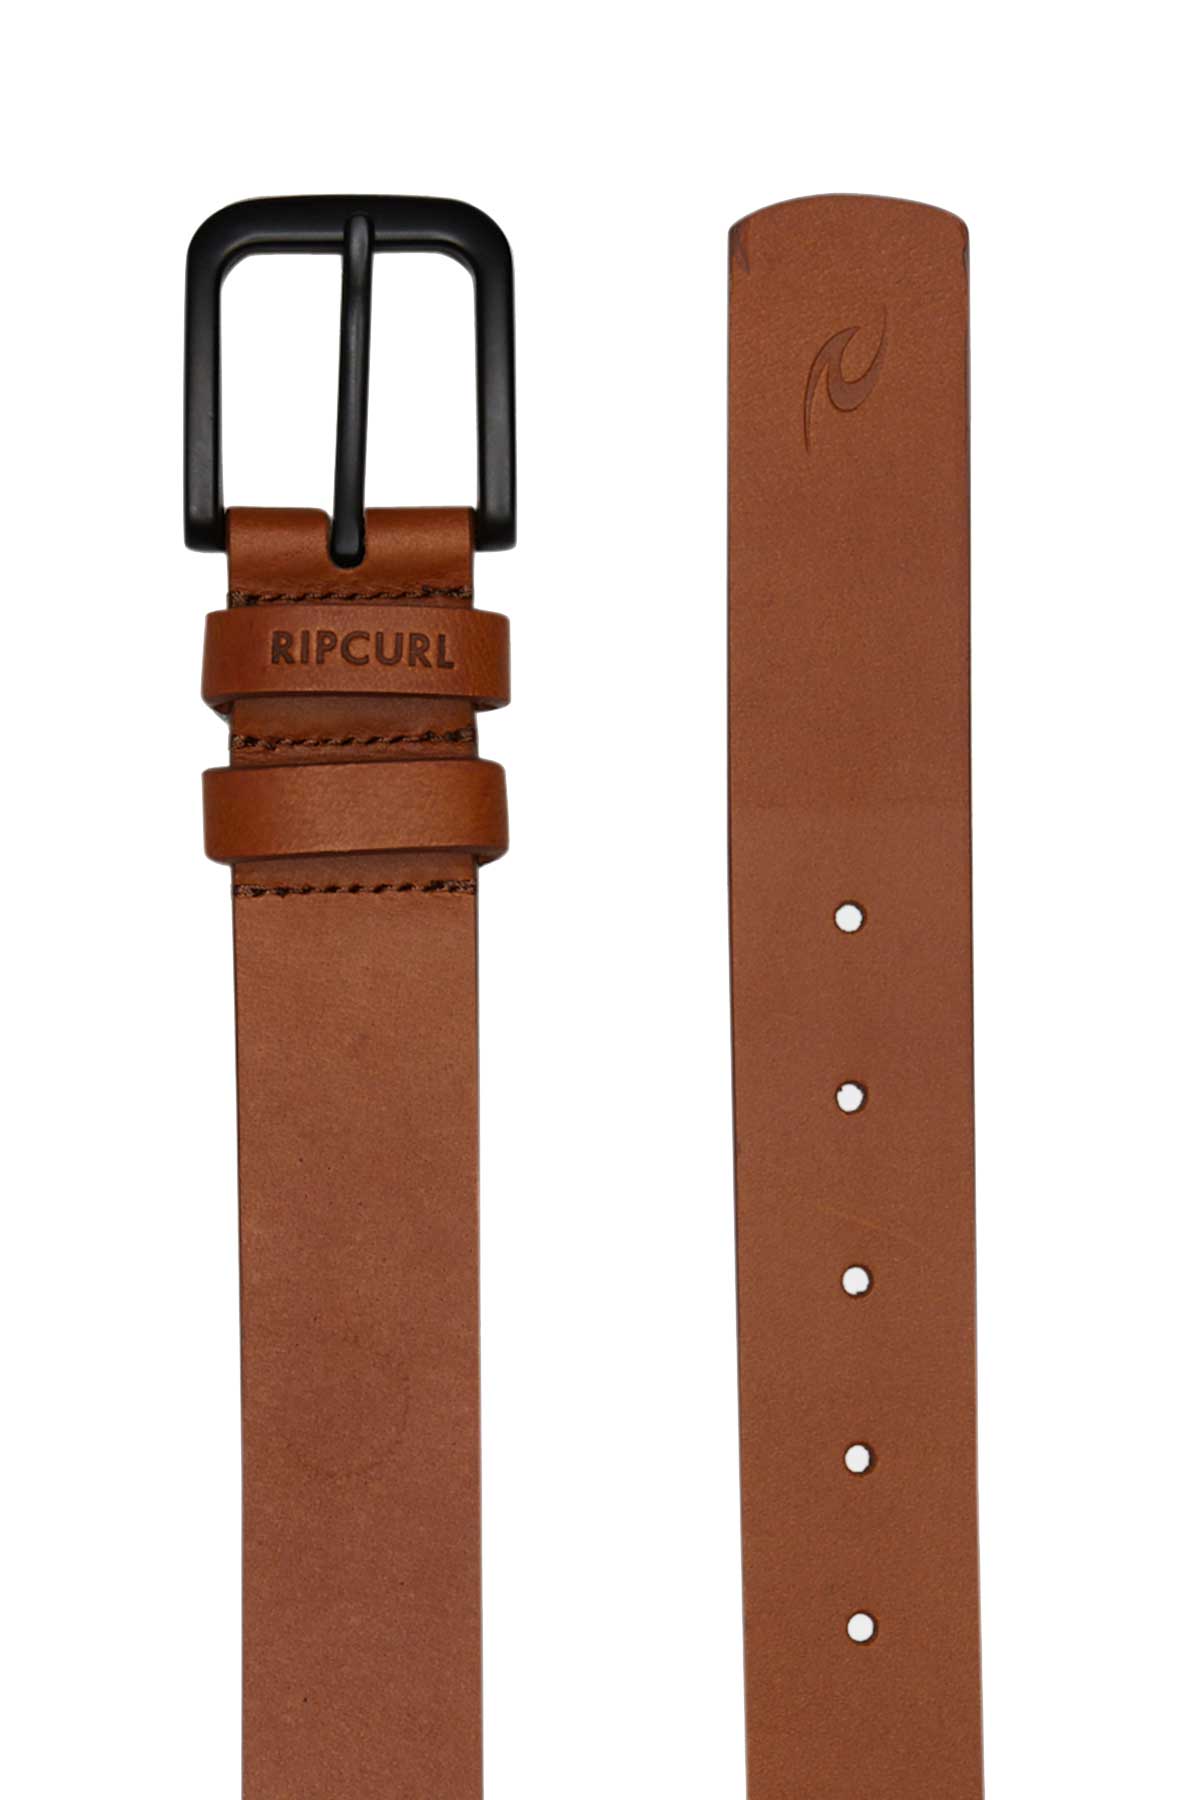 Rip Curl Mens Leather Belt - Cut Down in tan showing both ends